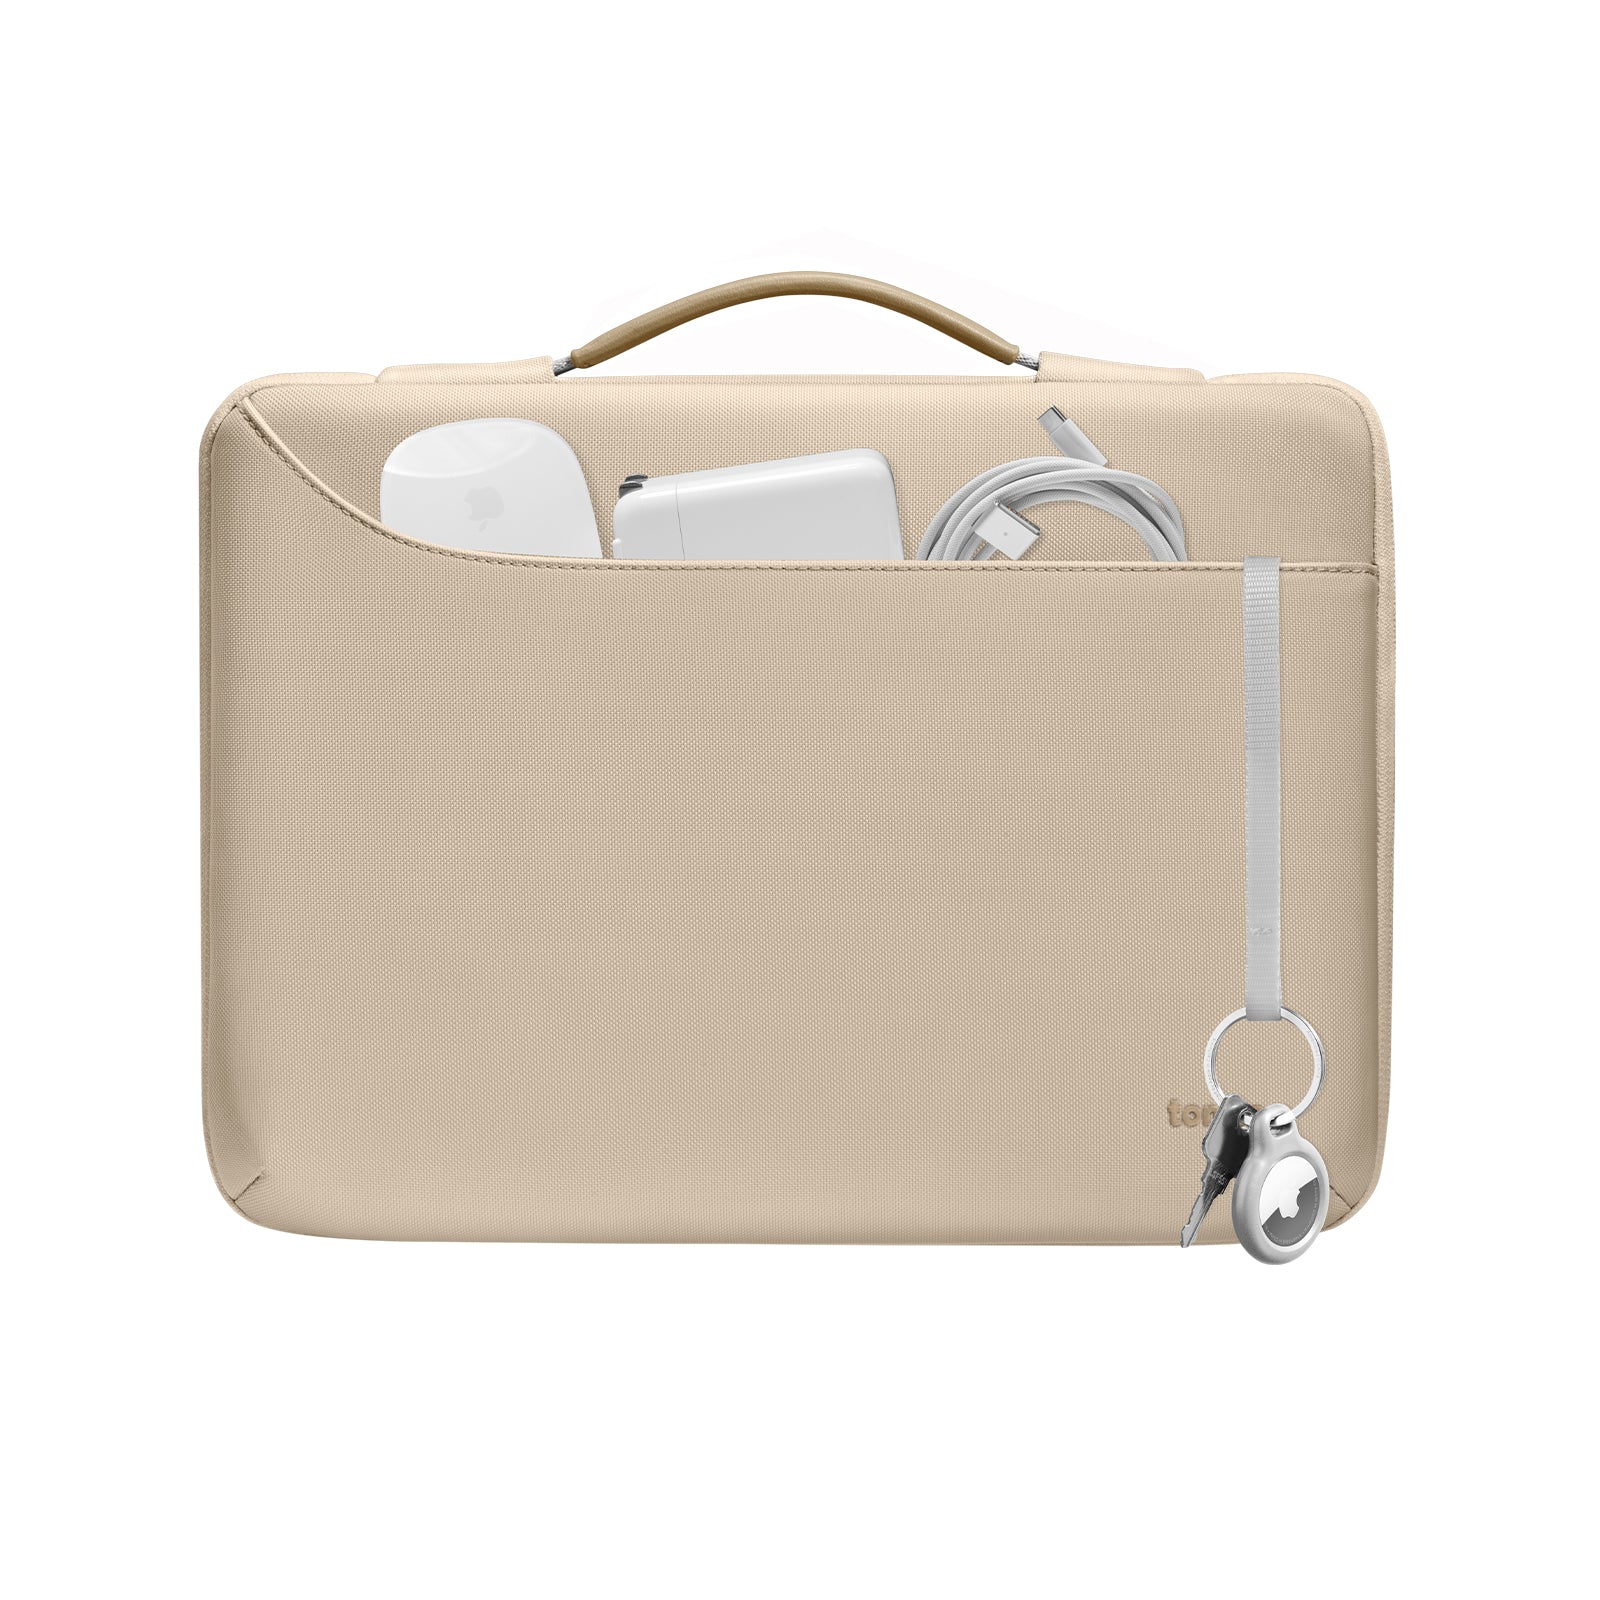 Defender-A22 Laptop Briefcase For 13-inch MacBook Air / Pro | Khaki